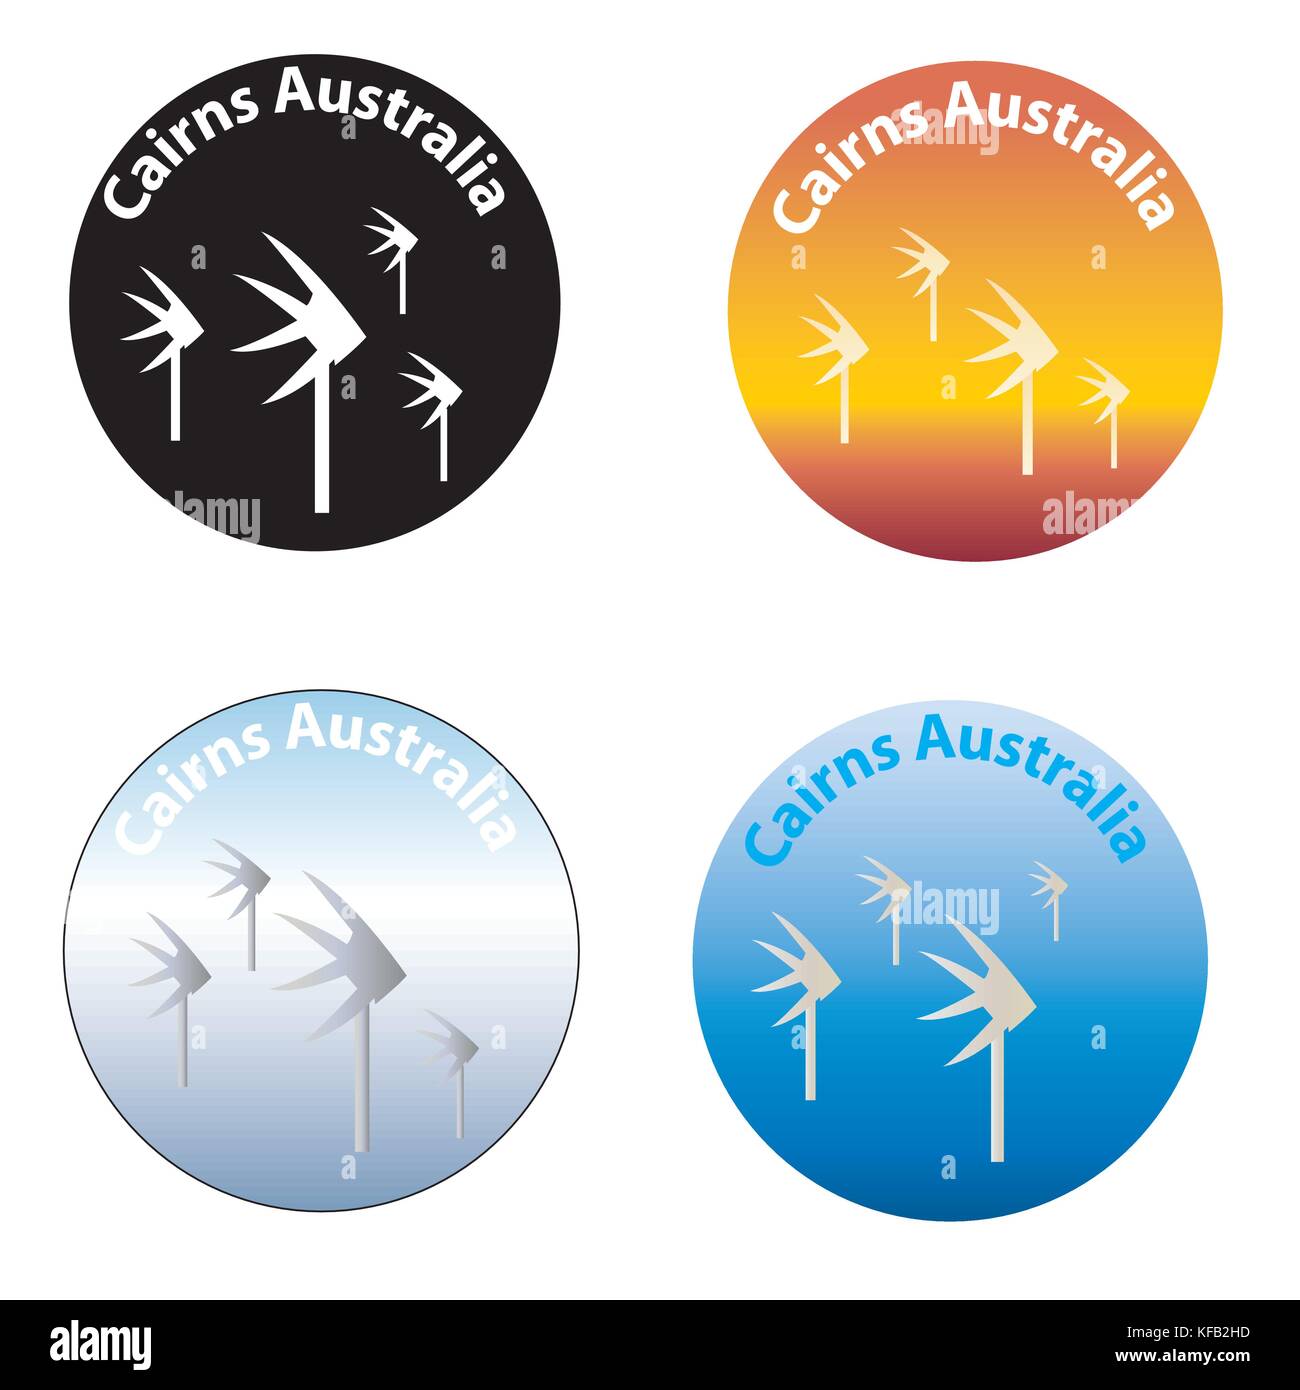 set of 4 round icon of depicting Cairns Australia Stock Vector